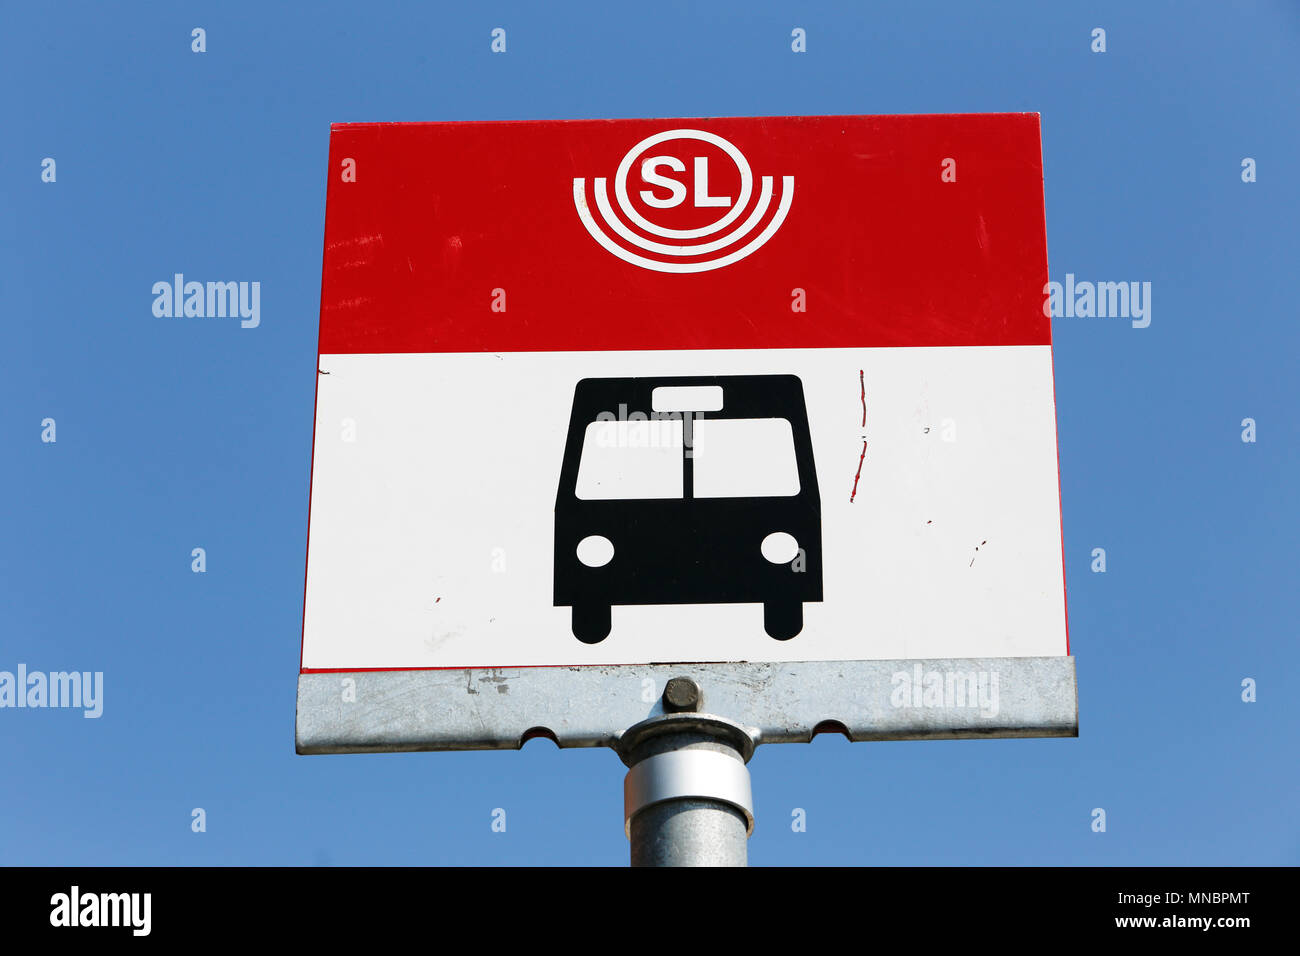 Stockholm, Sweden - July 8, 2014: Close-up of a Stockholm public transport, SL, bus stop with a bus symbol against the blue sky. Stock Photo